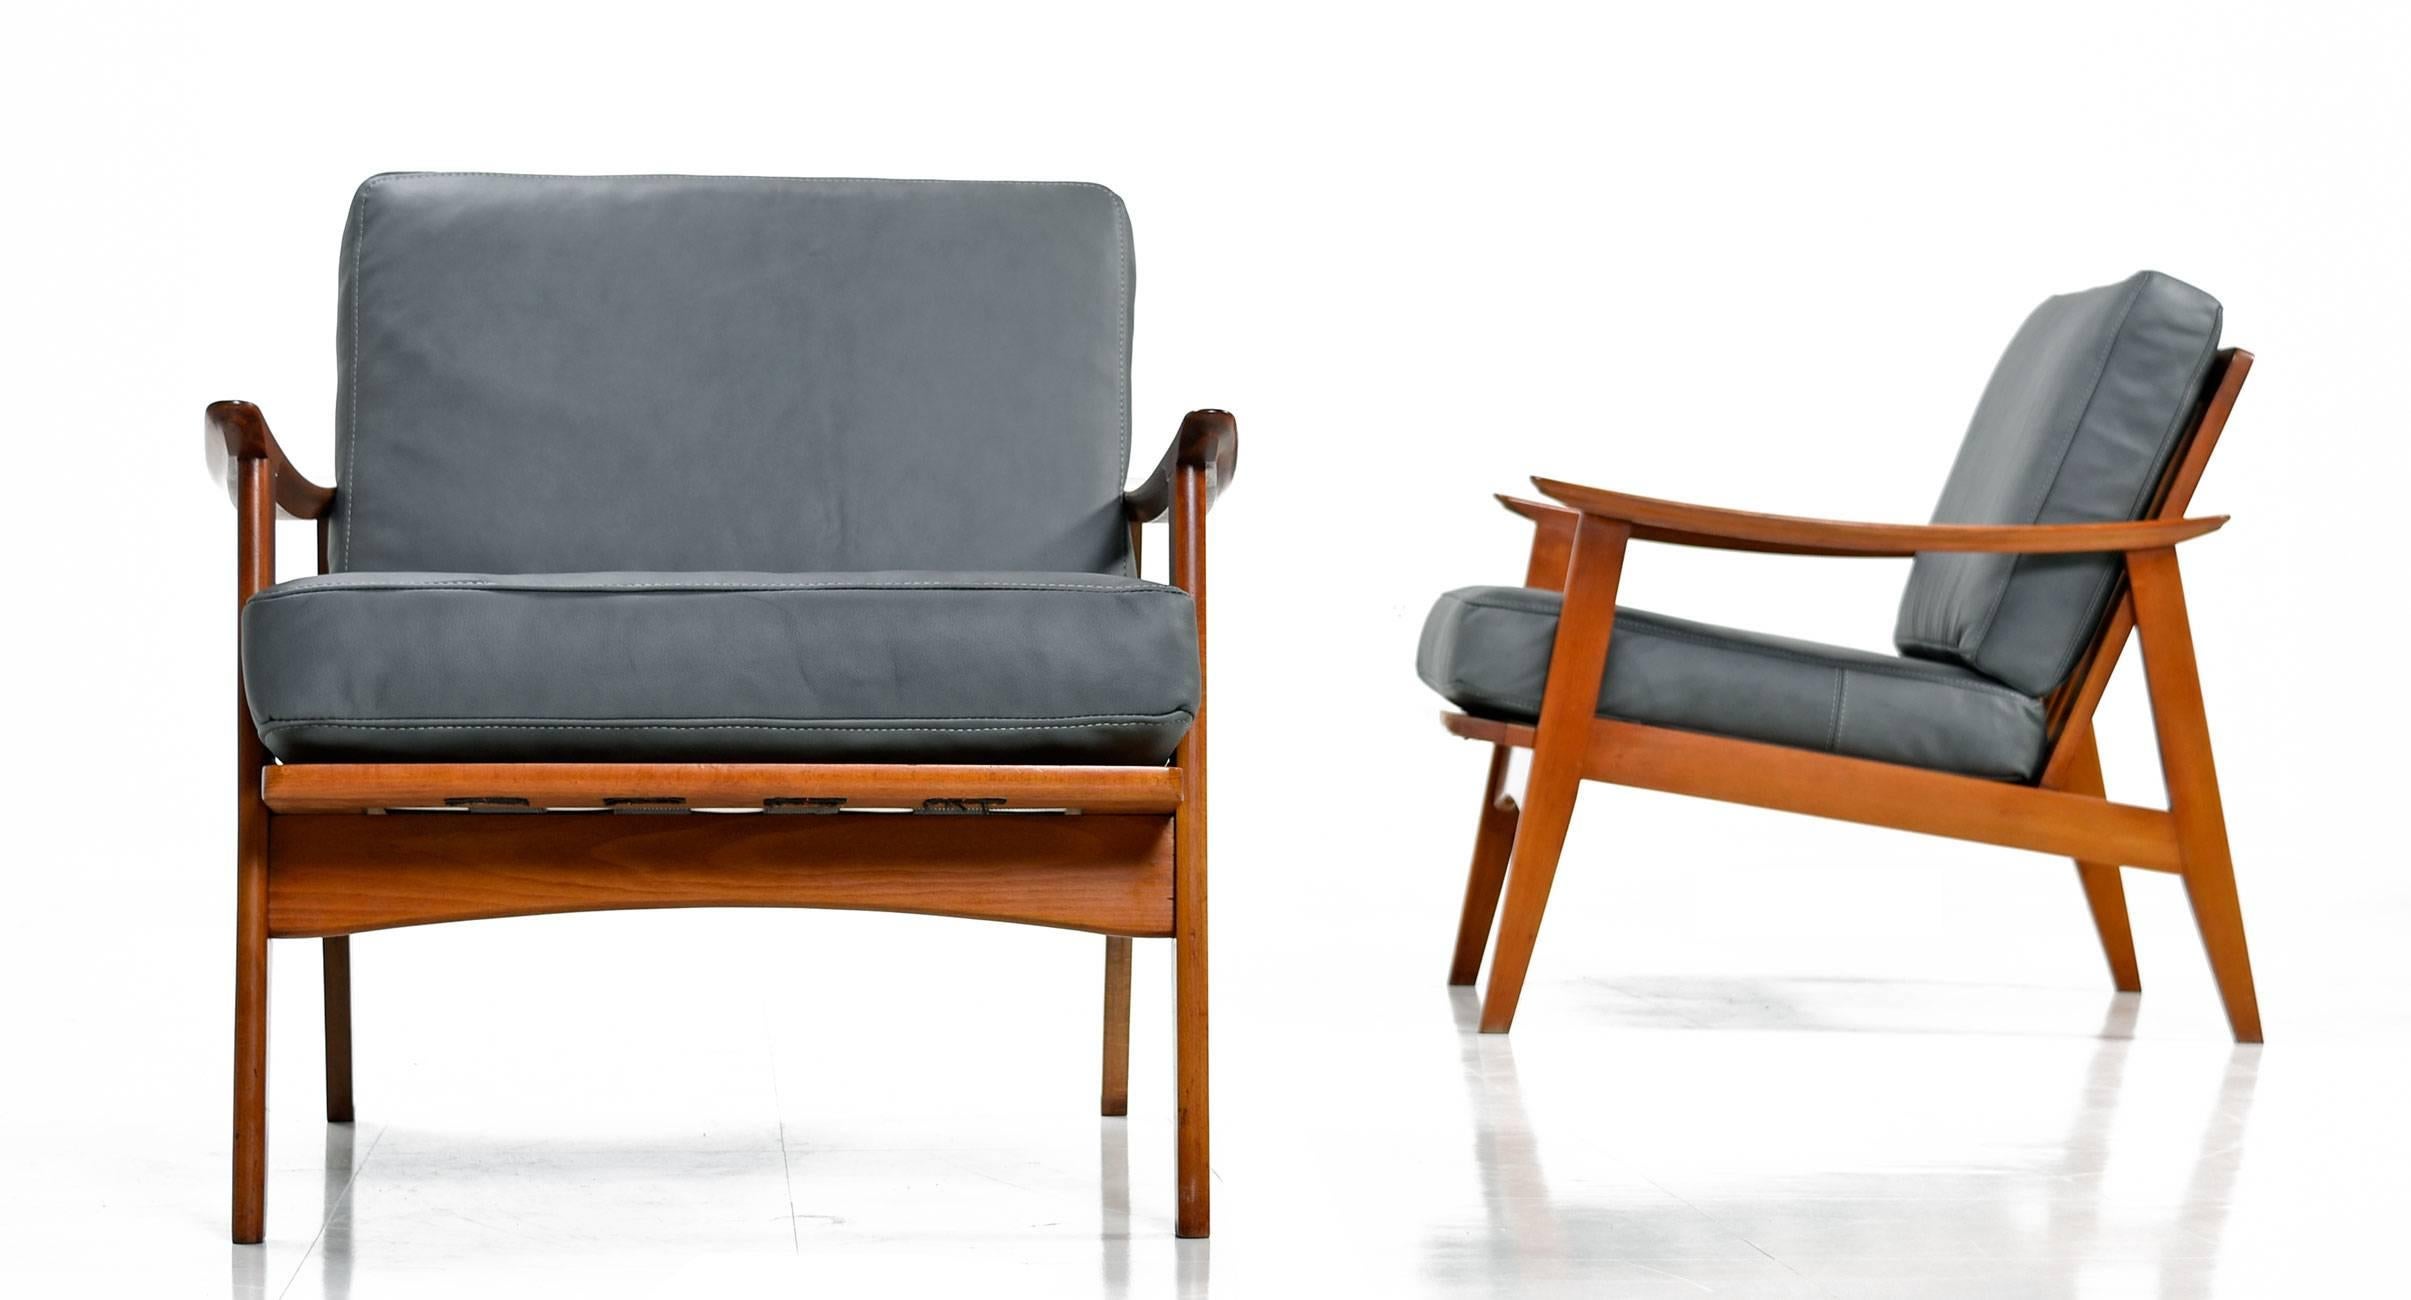 Handsome pair of Mid-Century Modern armchairs made in Yugoslavia. Vintage 1960s, these chairs have been updated with all new top grain gray leather upholstery. Minimalist clean lines give these chairs a captivating Silhouette from all vantages. The